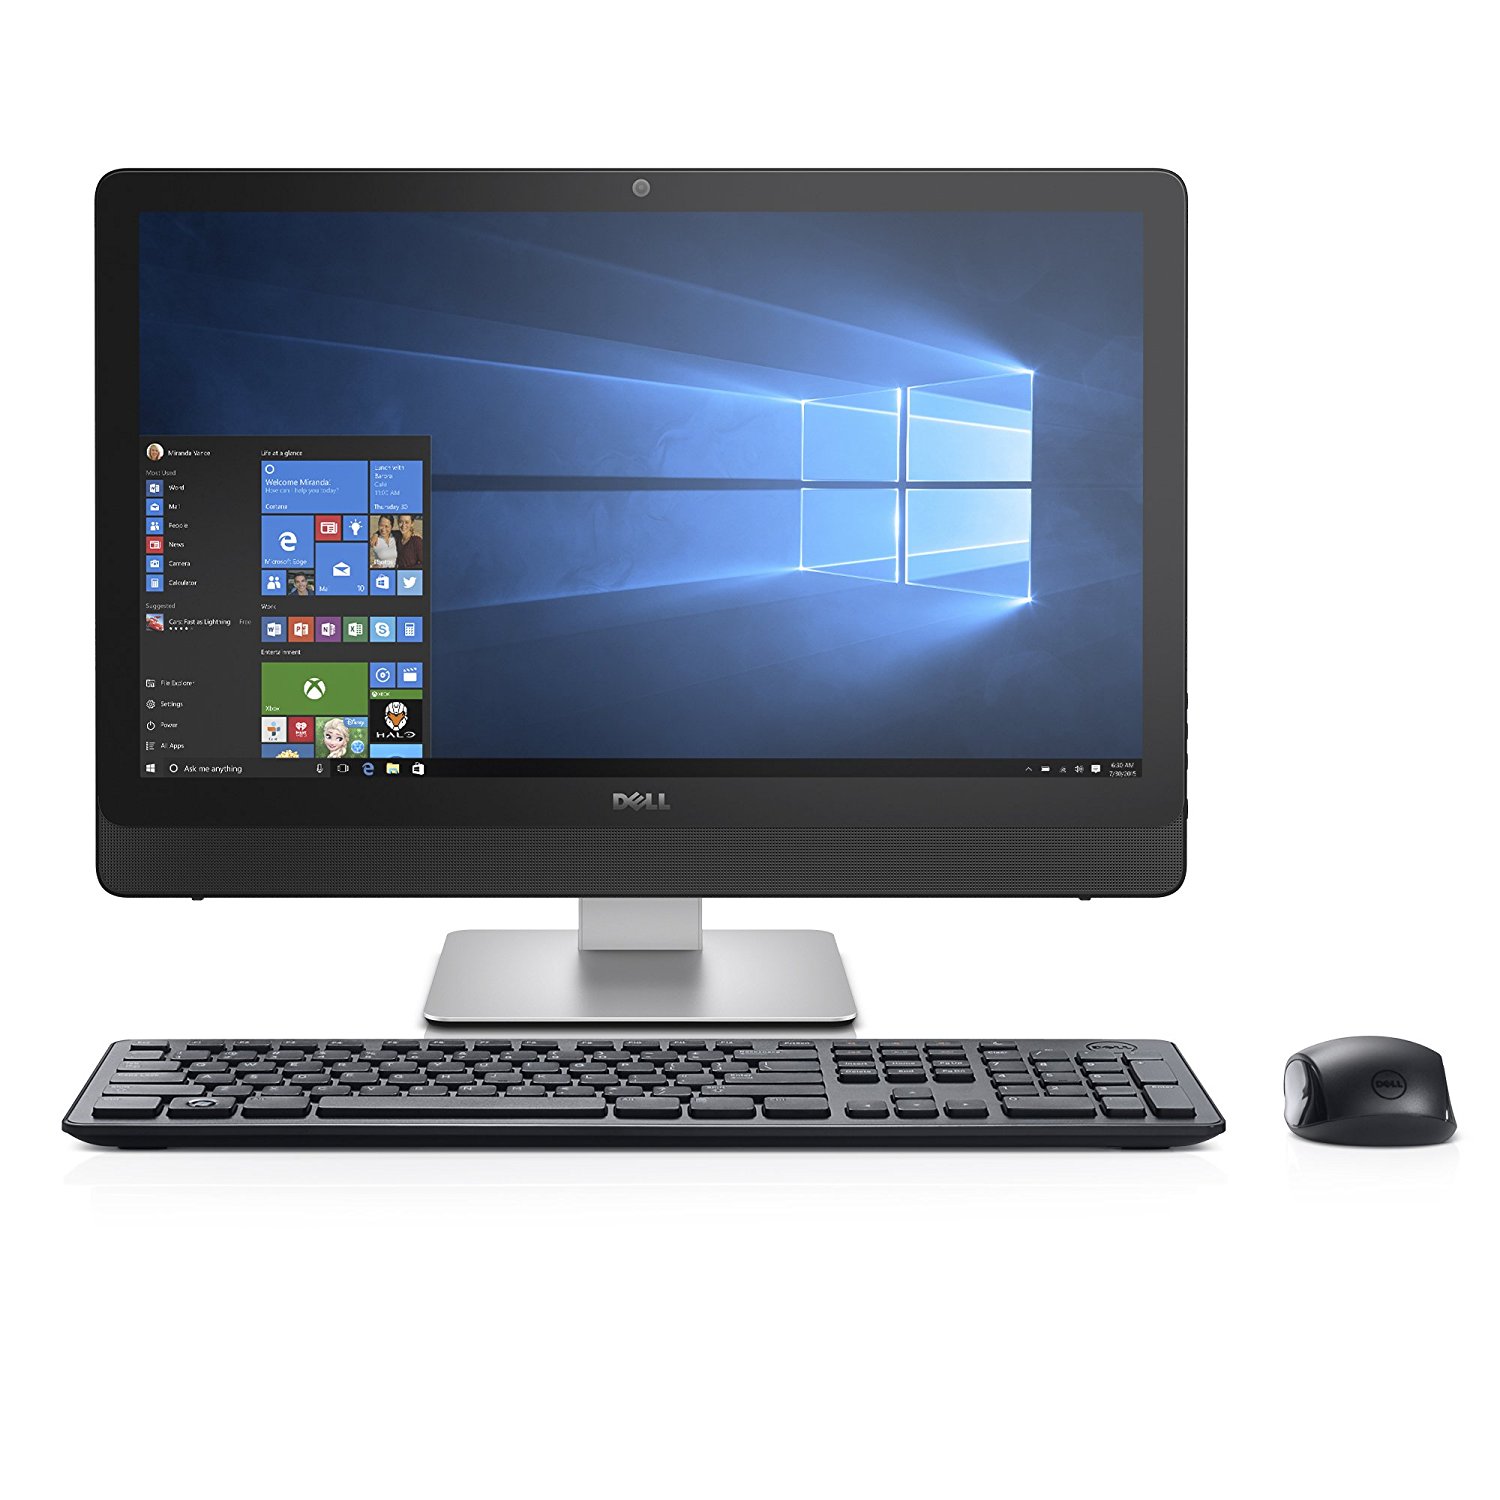 Dell Inspiron 24 3000 Series Touchscreen All-In-One (Intel Core i3, 8 GB RAM, 1 TB HDD)